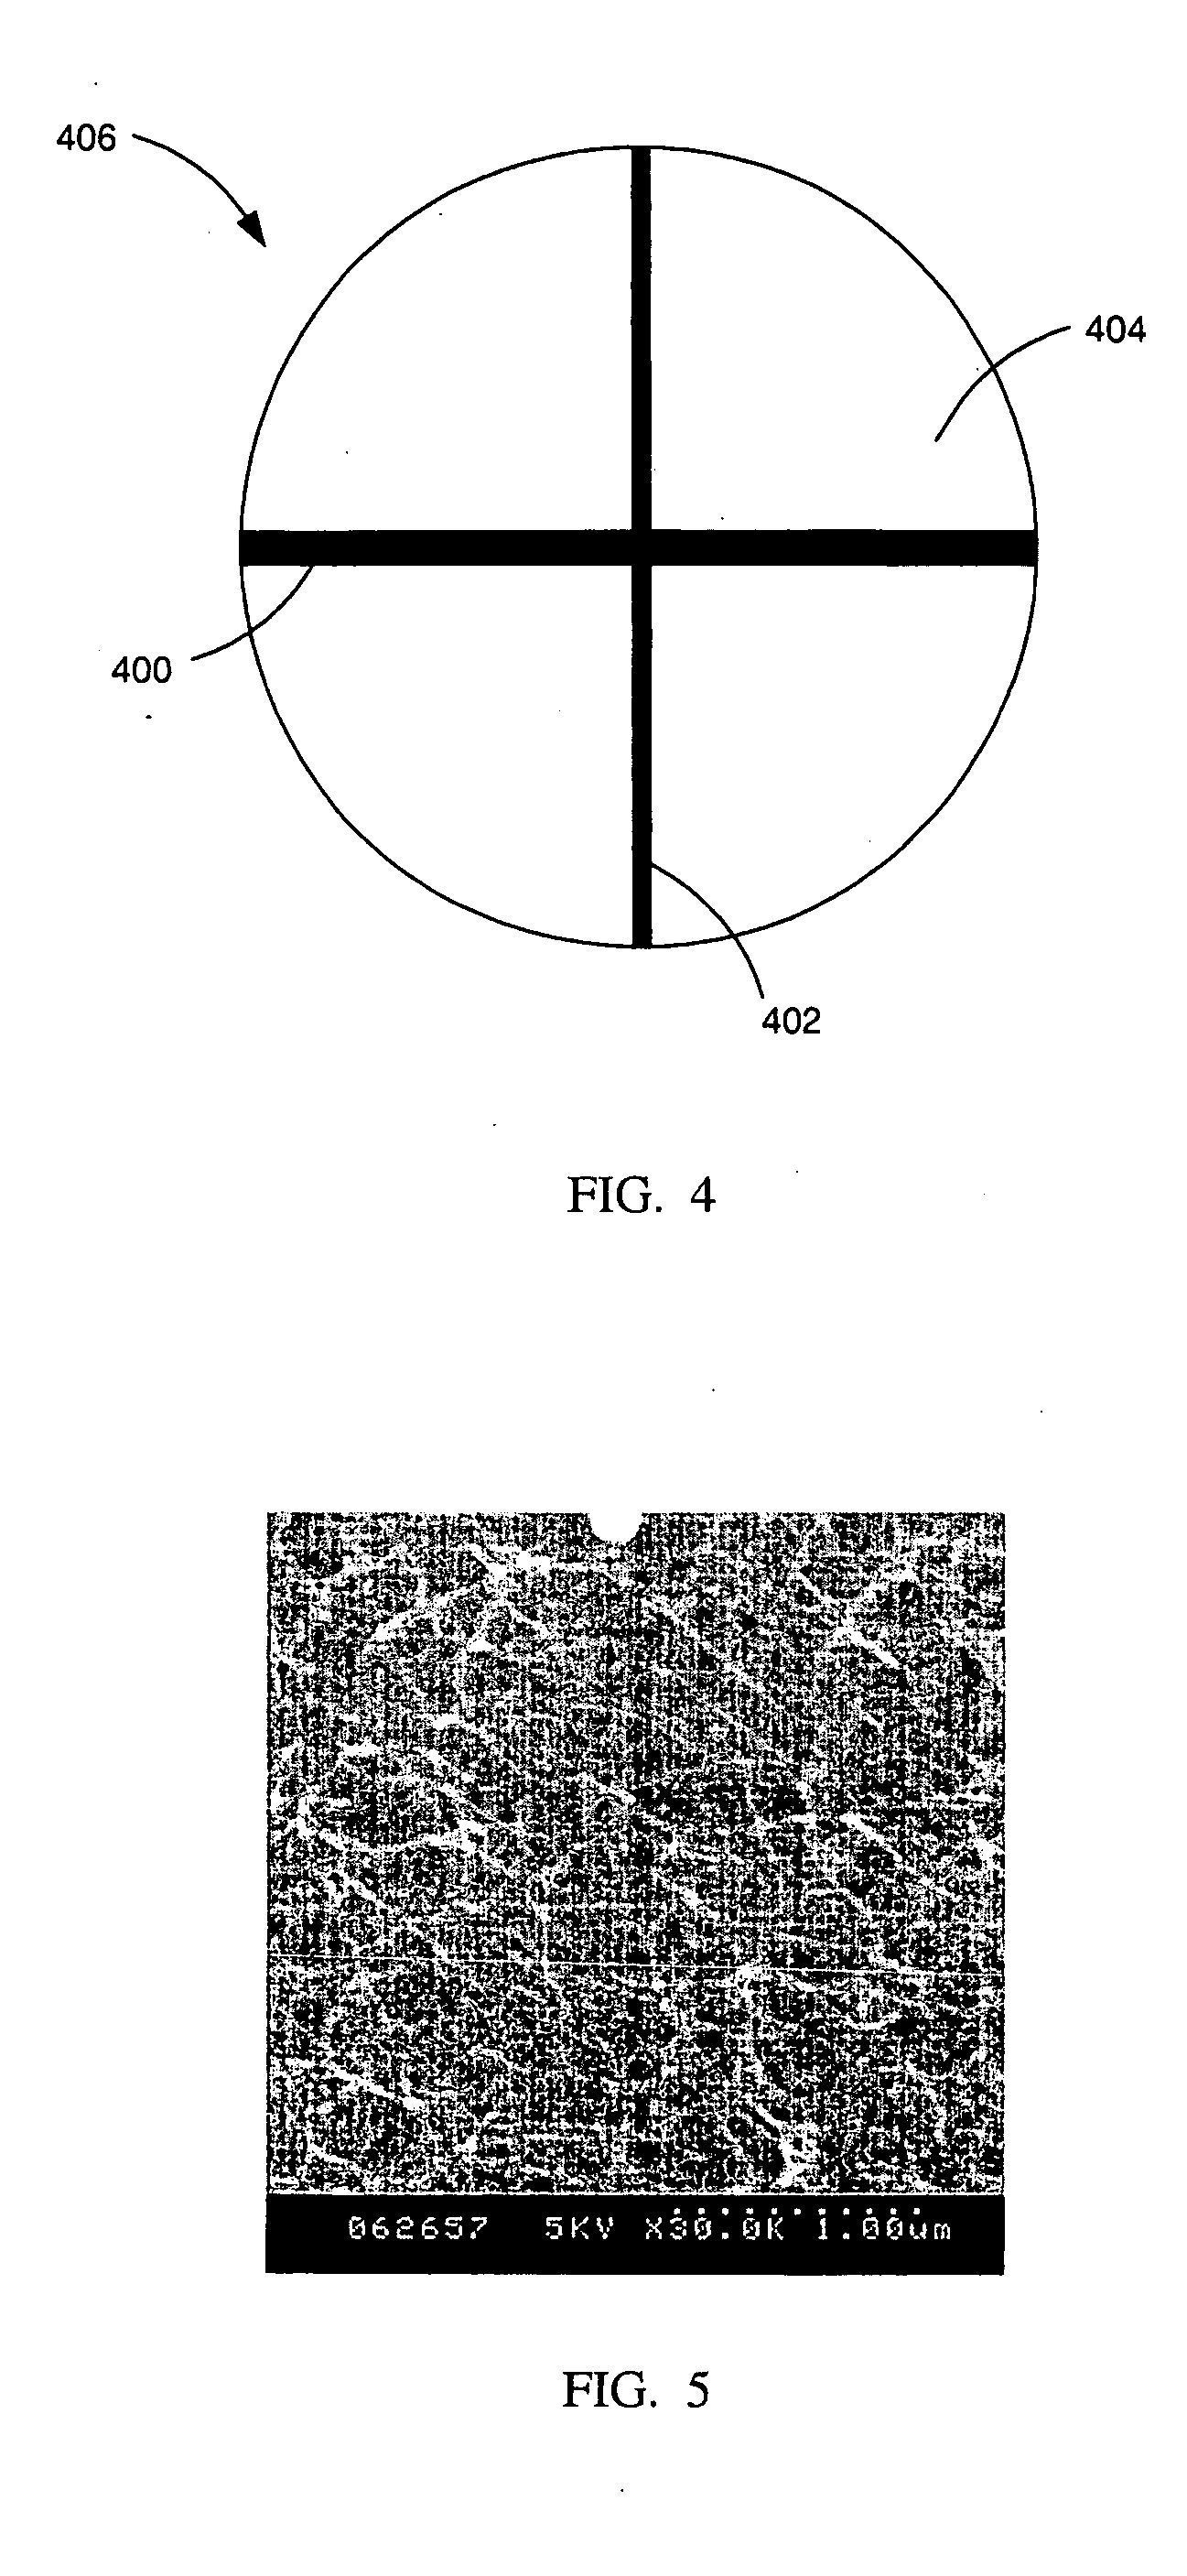 Methods for producing and using catalytic substrates for carbon nanotube growth